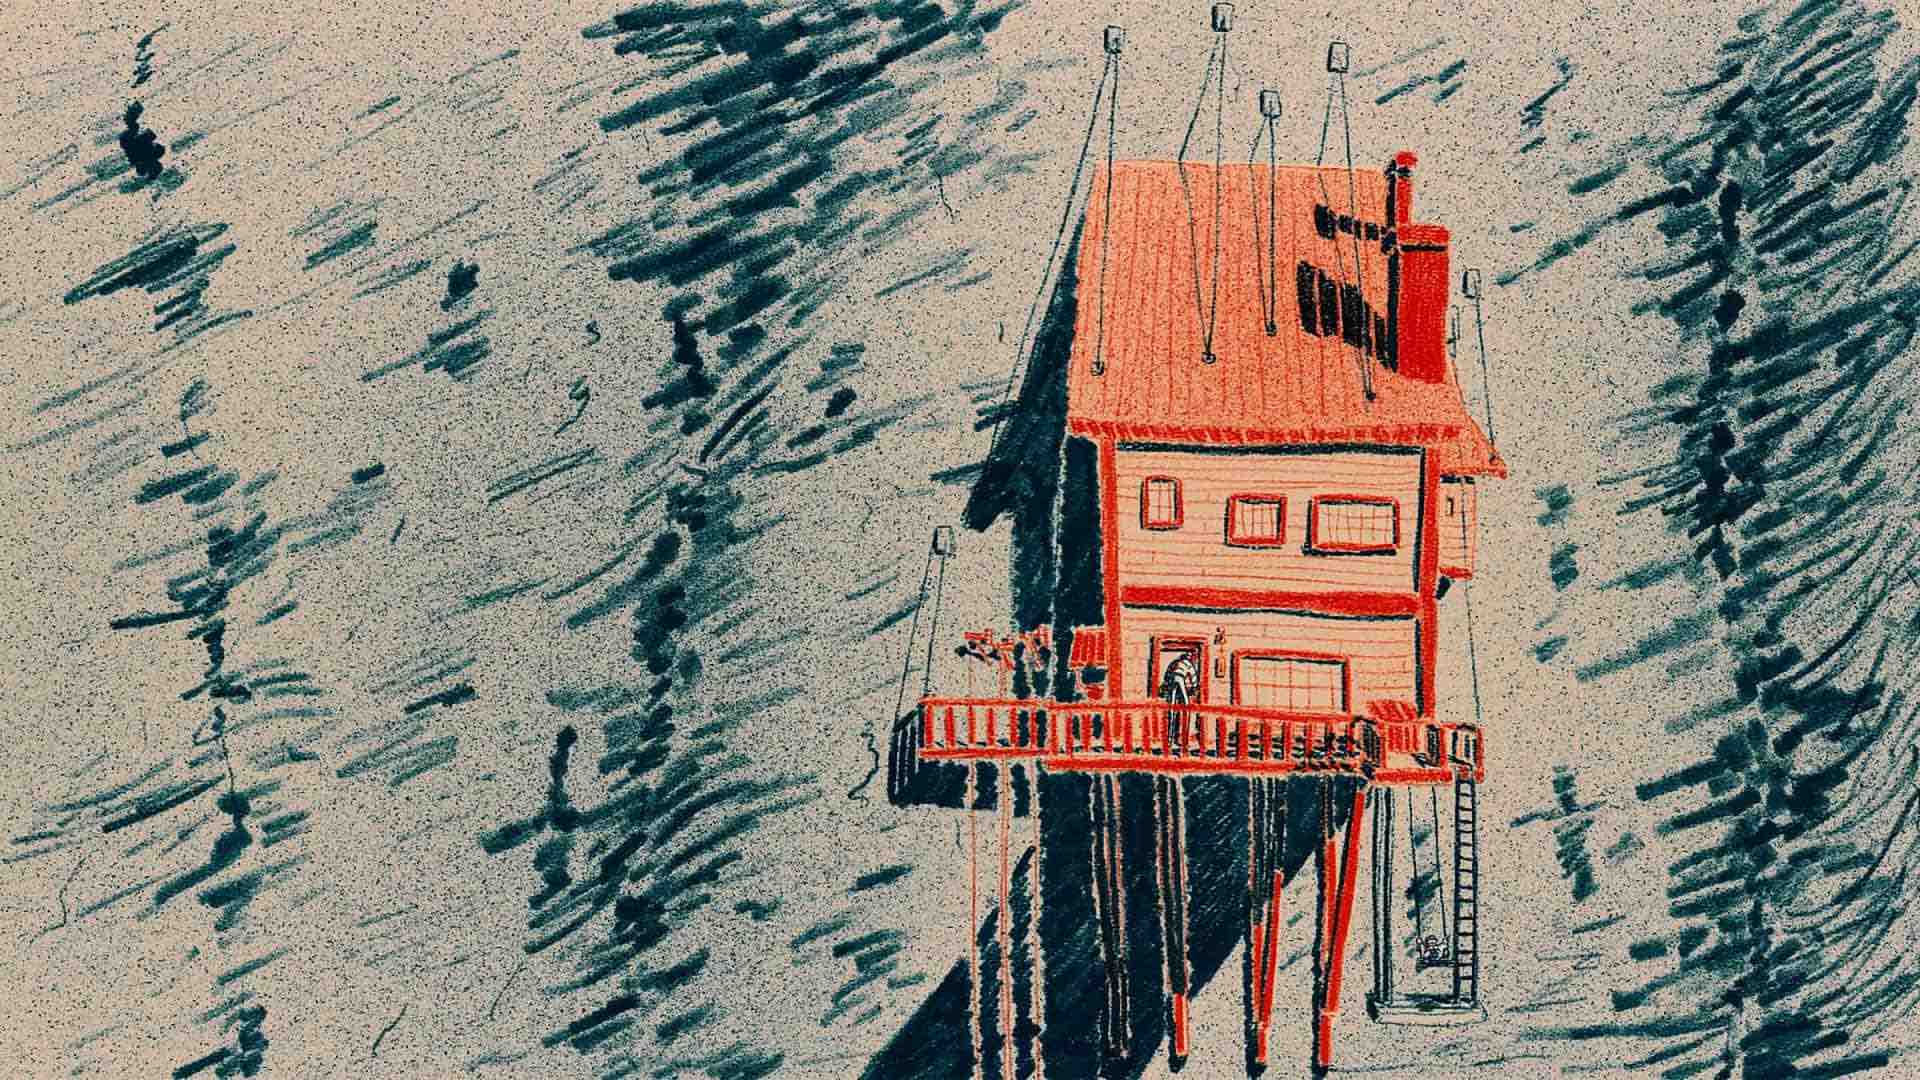 An animated orange cold house hanging on a cliff in the Ice Merchants, an Oscar 2023 nominated animated short film